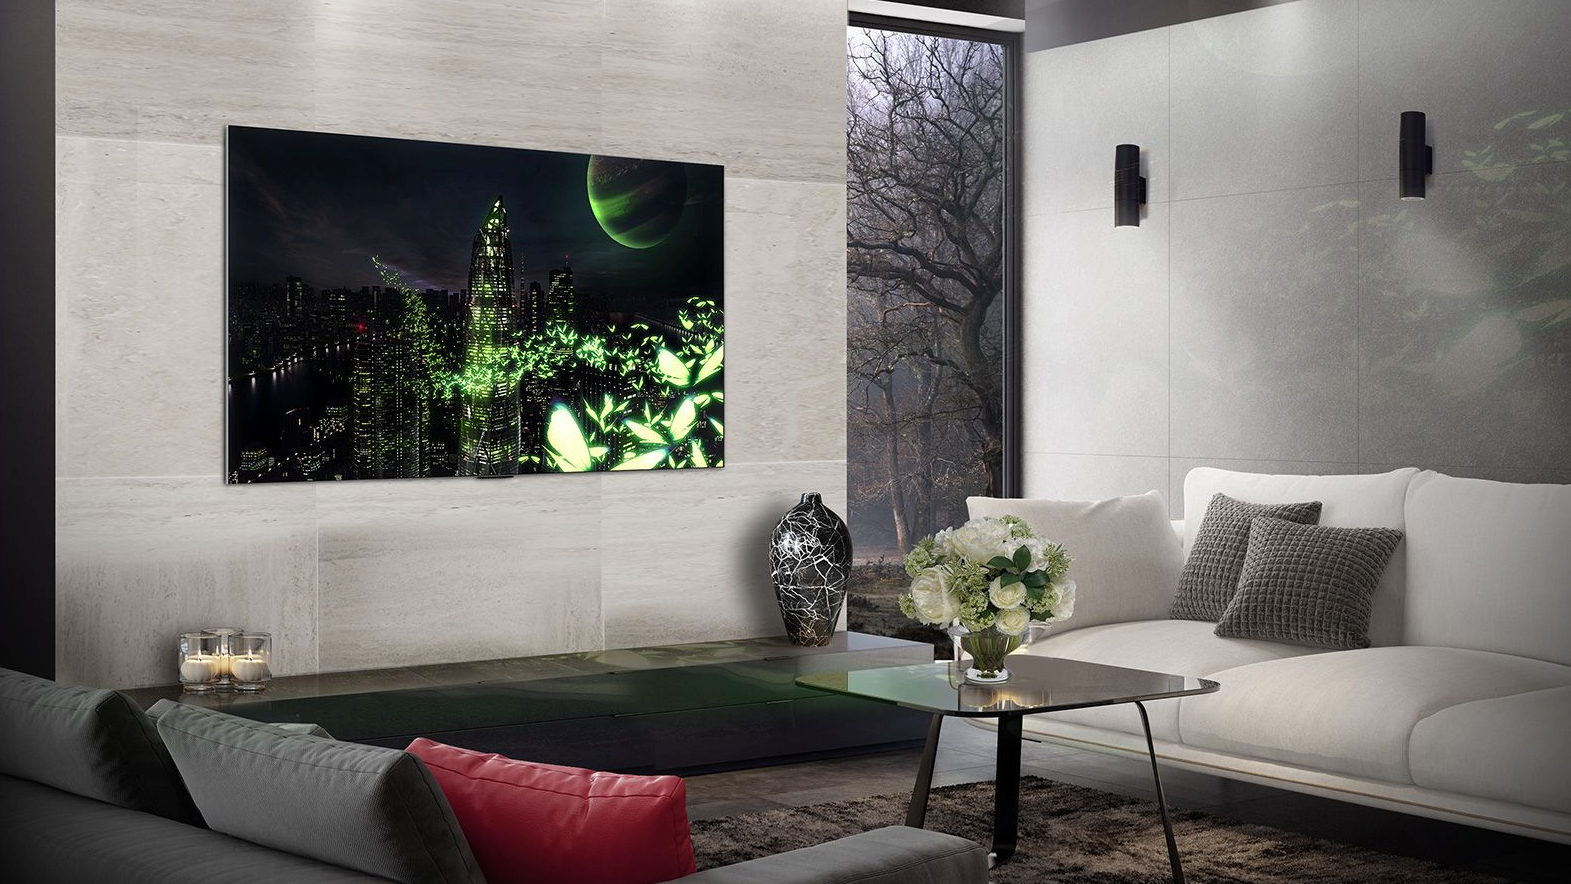 Hurry! The LG G2 OLED TV will never be cheaper (probably)